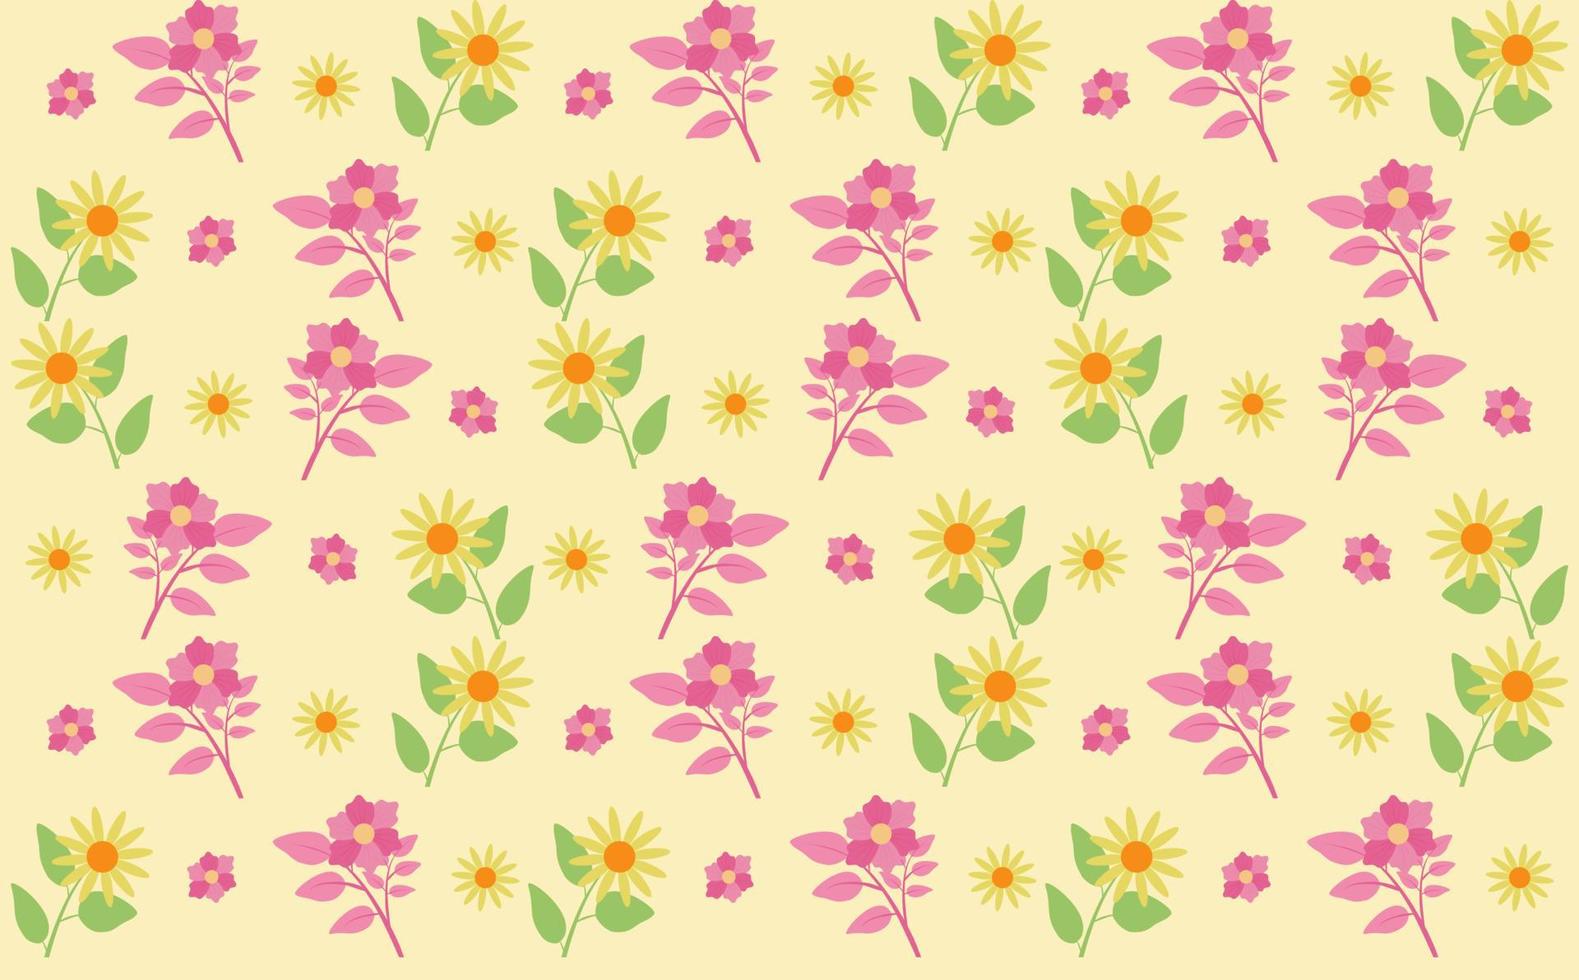 Daisy and rose petal pattern, on a bright background, Chamomile flower buds, Seamless floral pattern, Floral pattern texture concept. minimal prints for cards or wrapping paper vector